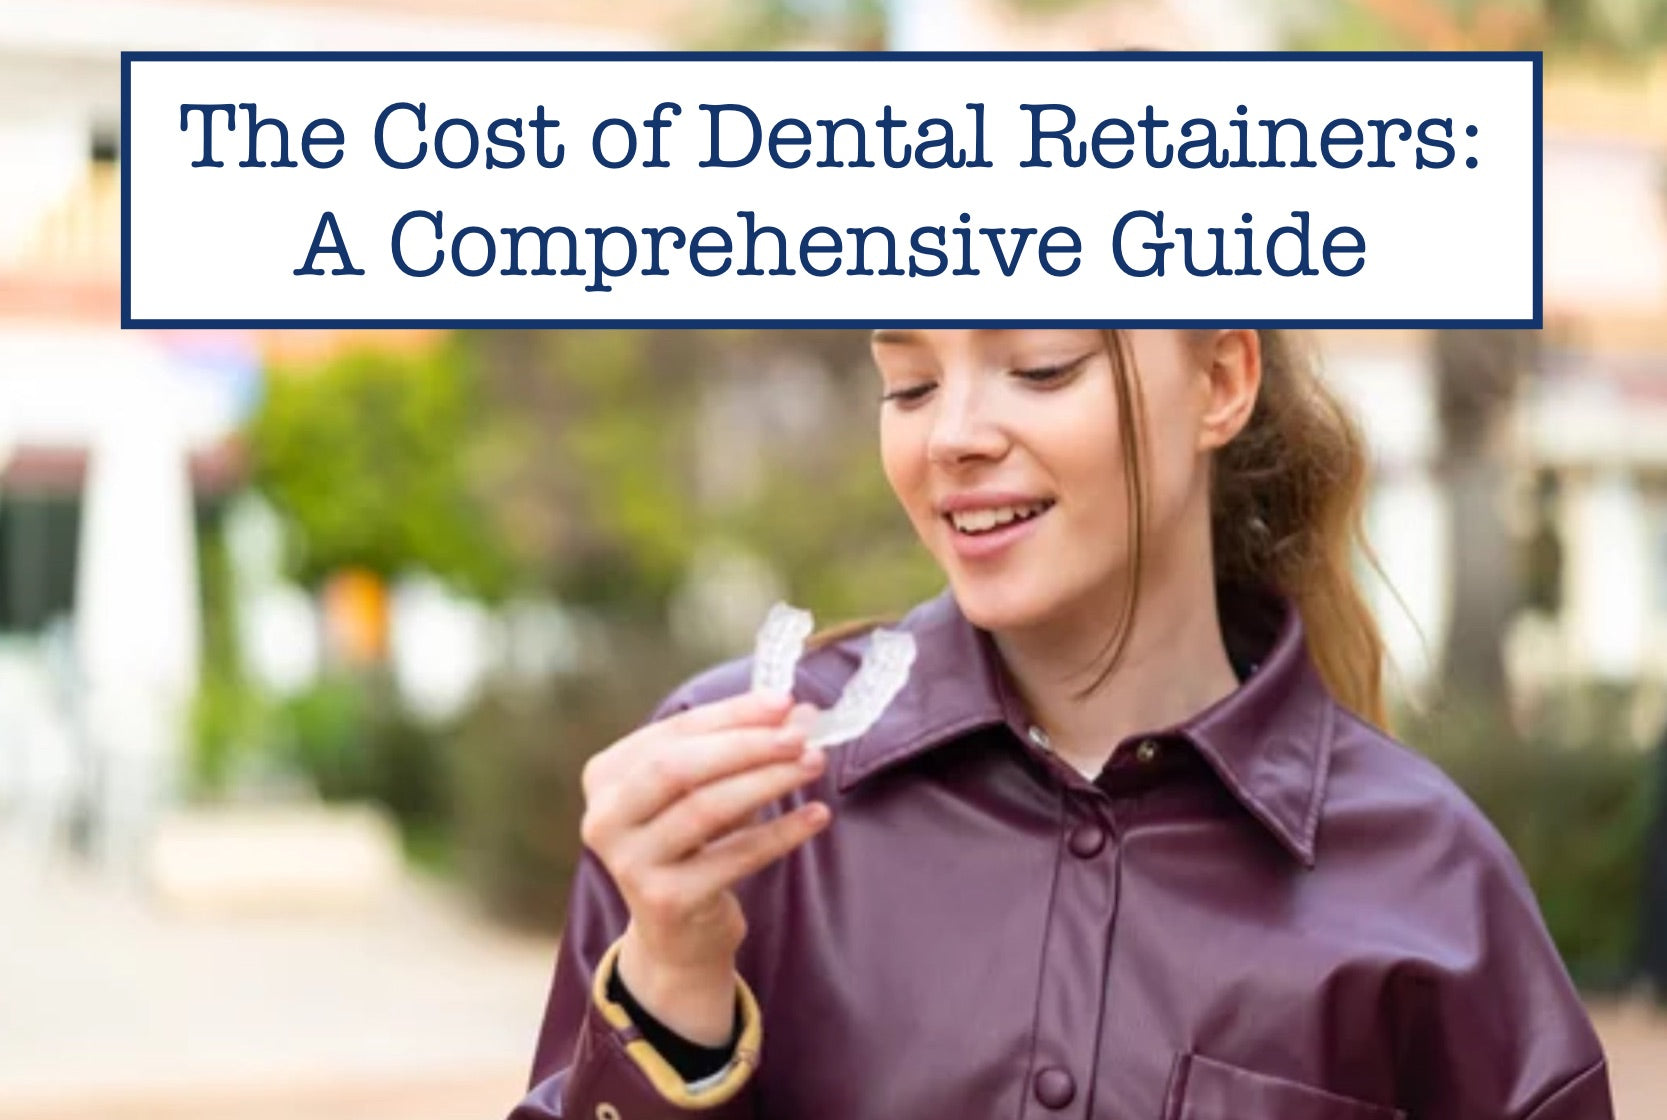 The Cost of Dental Retainers: A Comprehensive Guide